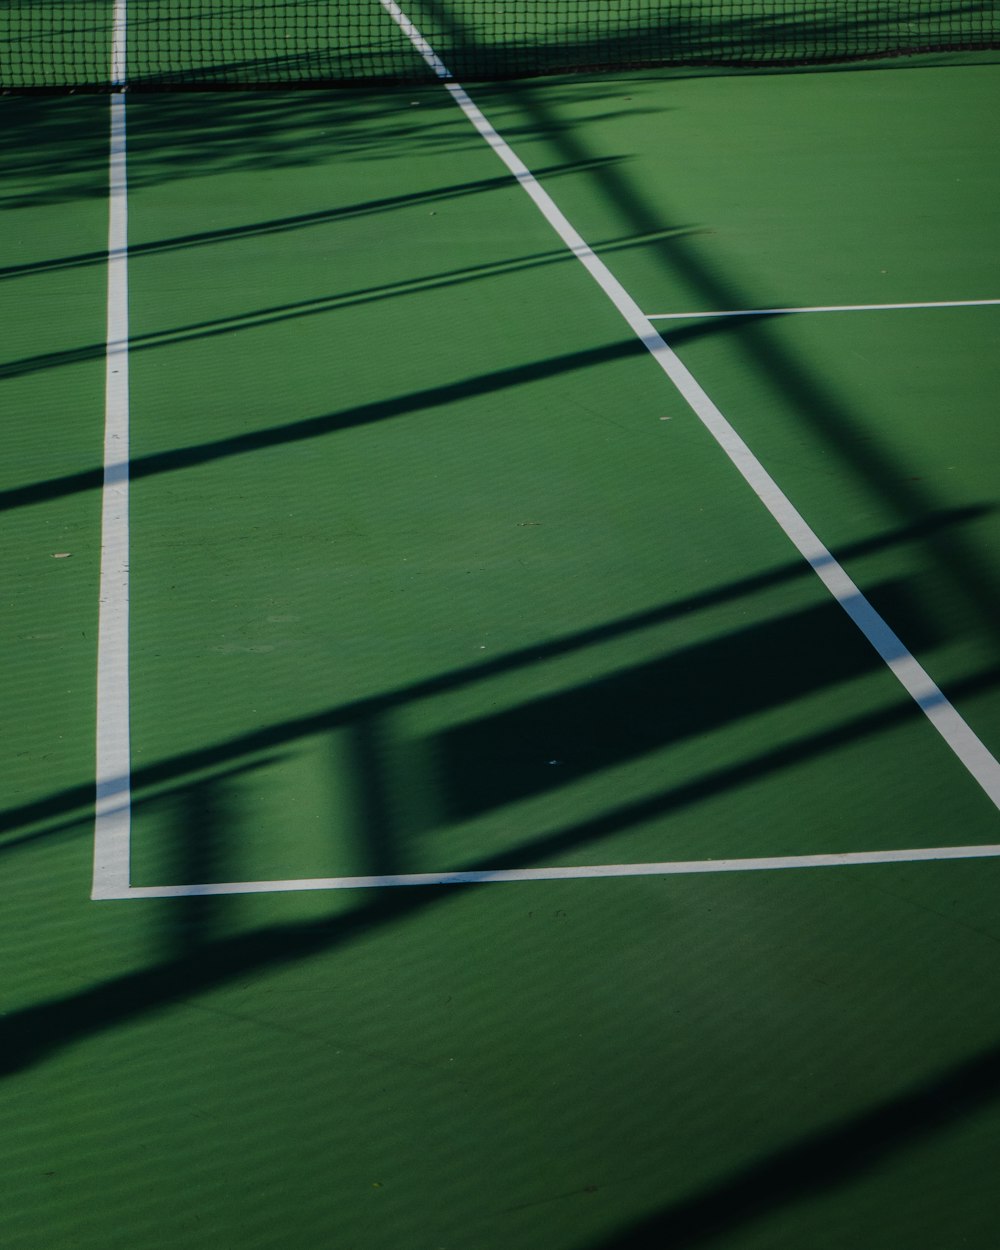 a person on a tennis court with a racket